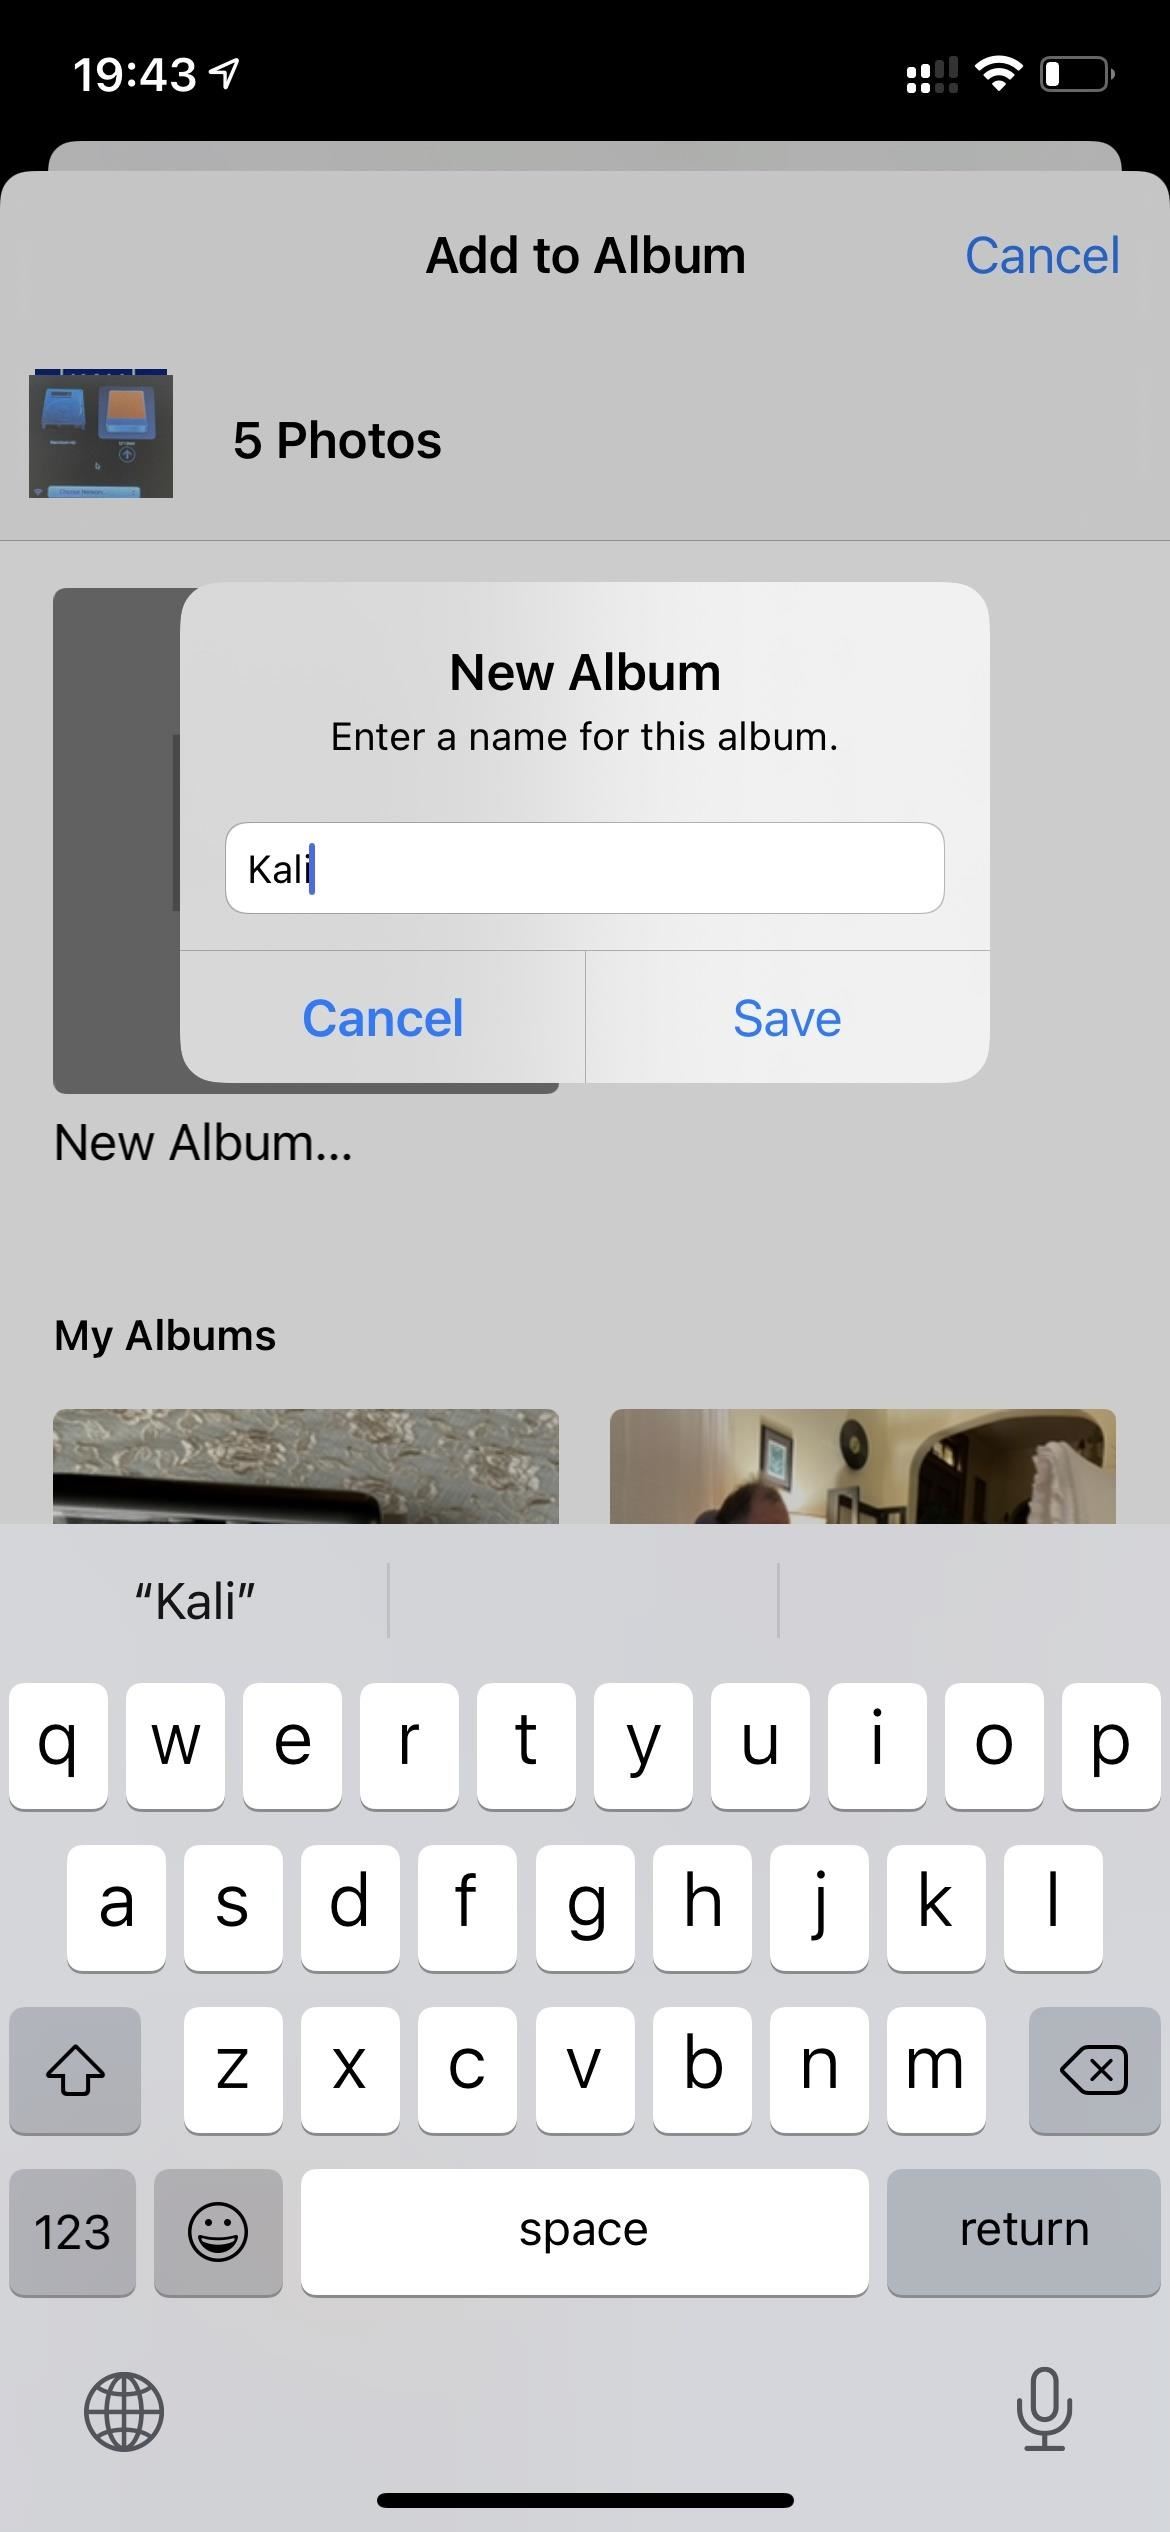 How to Bulk Add or Change Captions for Photos on Your iPhone Instead of Doing It One by One